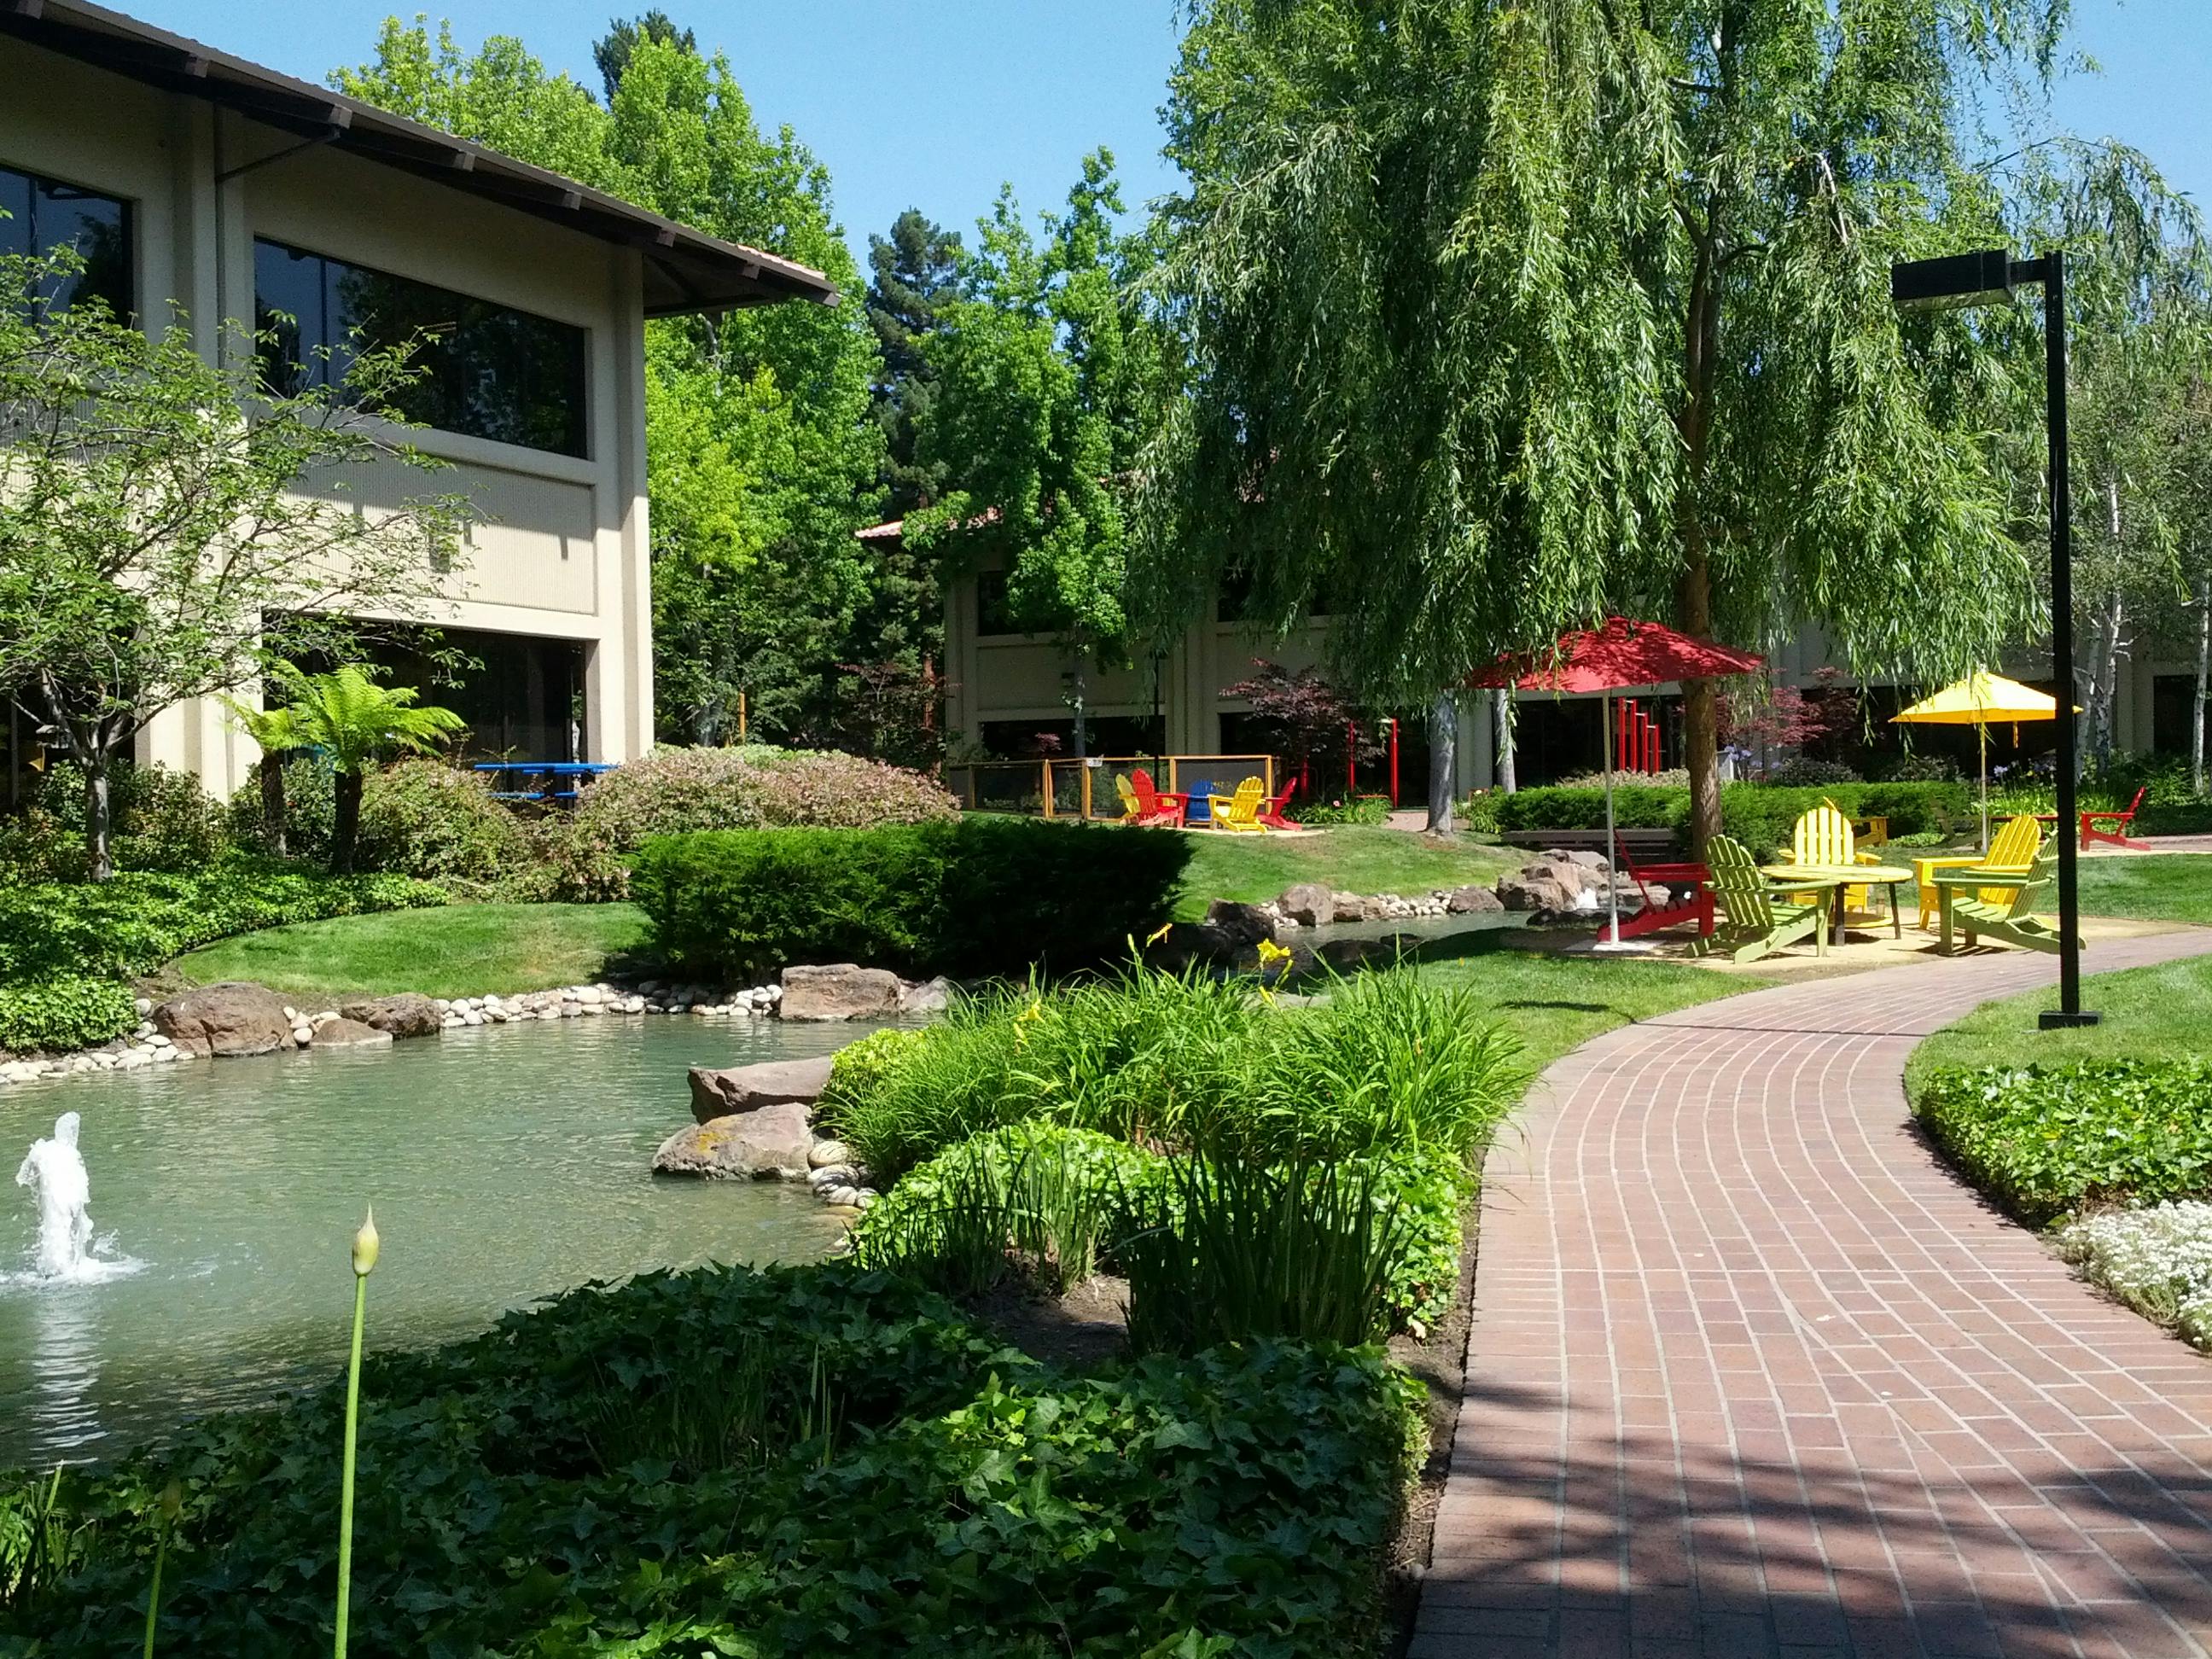 photograph of grounds at Google headquarters, with lawn chairs, picnic tables, and a pond